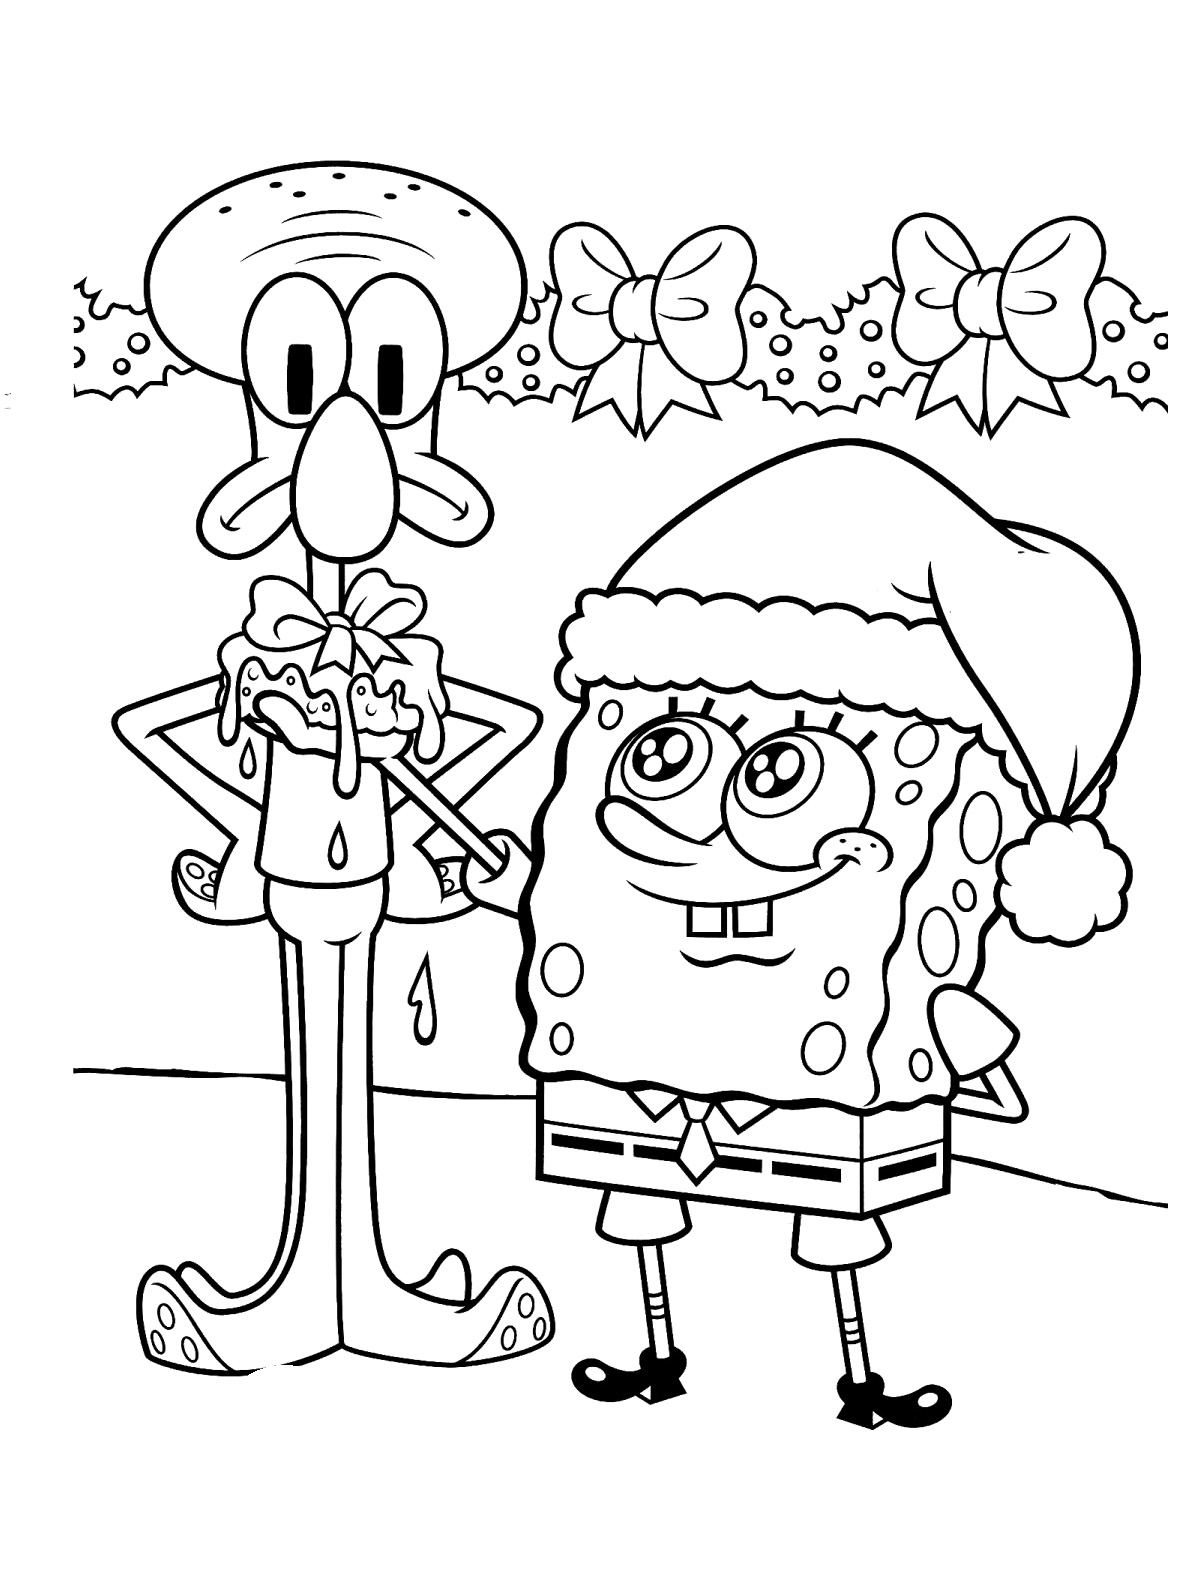 Spongebob Coloring Pages For You